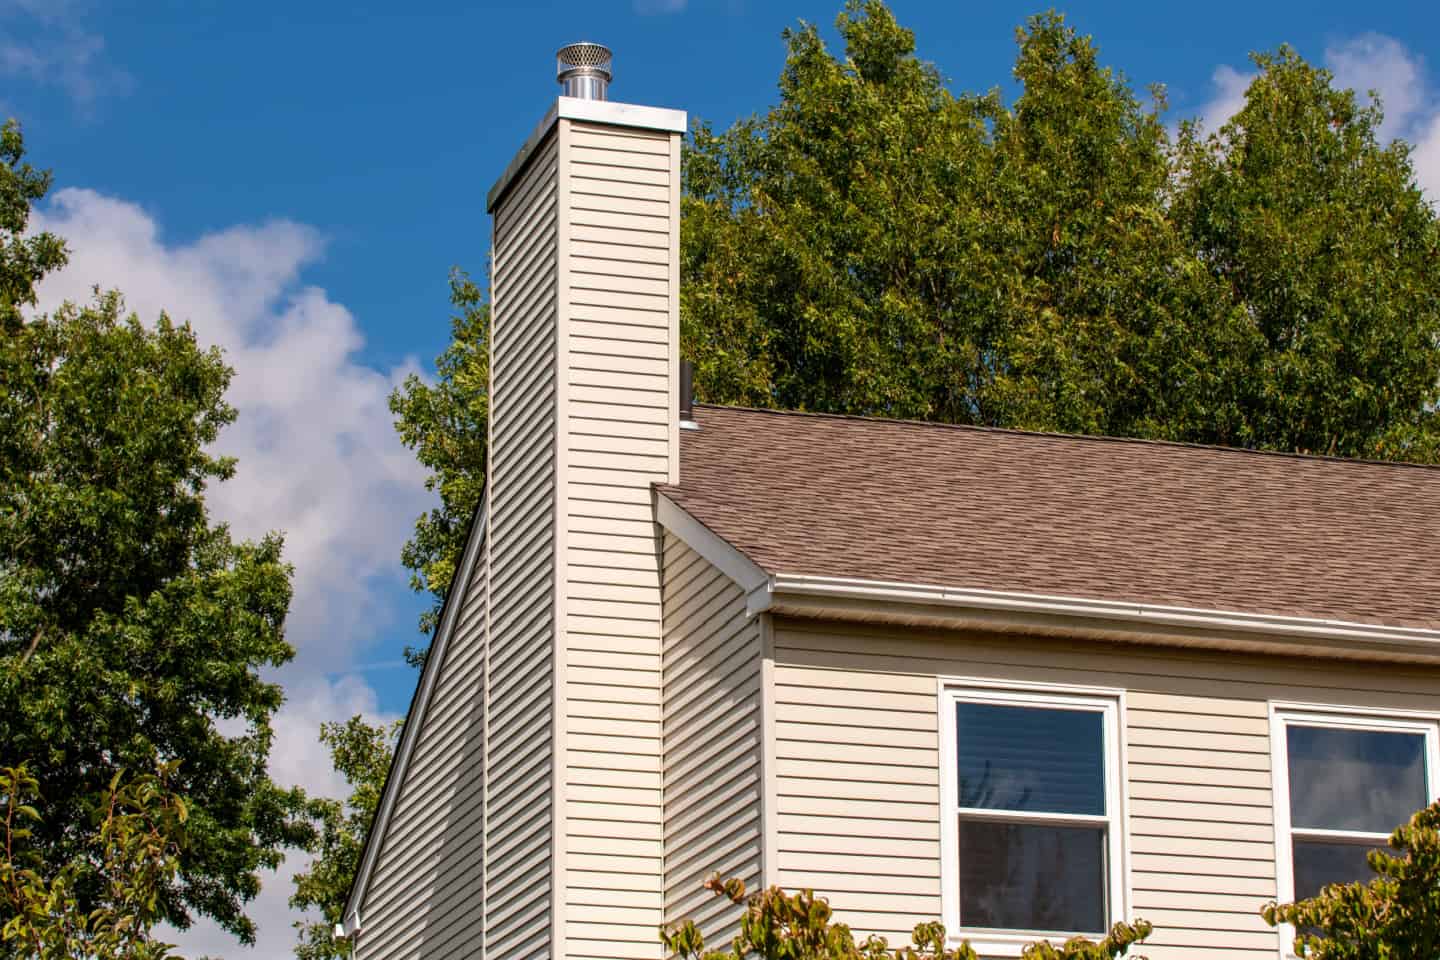 Chimney Installation and replacement in Alabama.